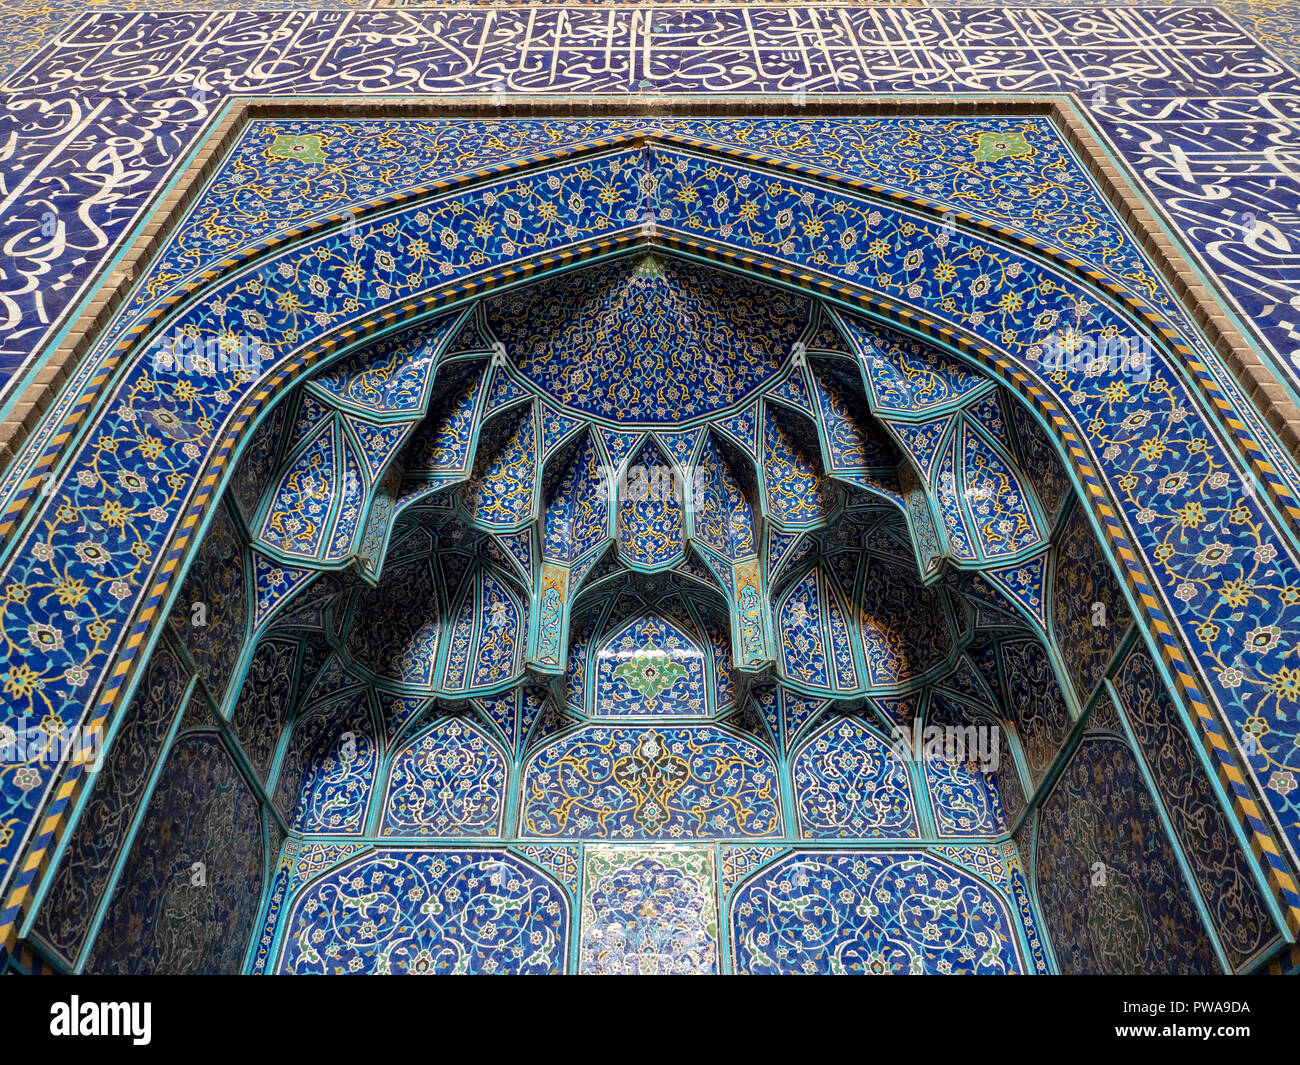 Lo Sceicco Lotfollah Mosque piastrelle colorate, Isfahan, Iran Foto Stock